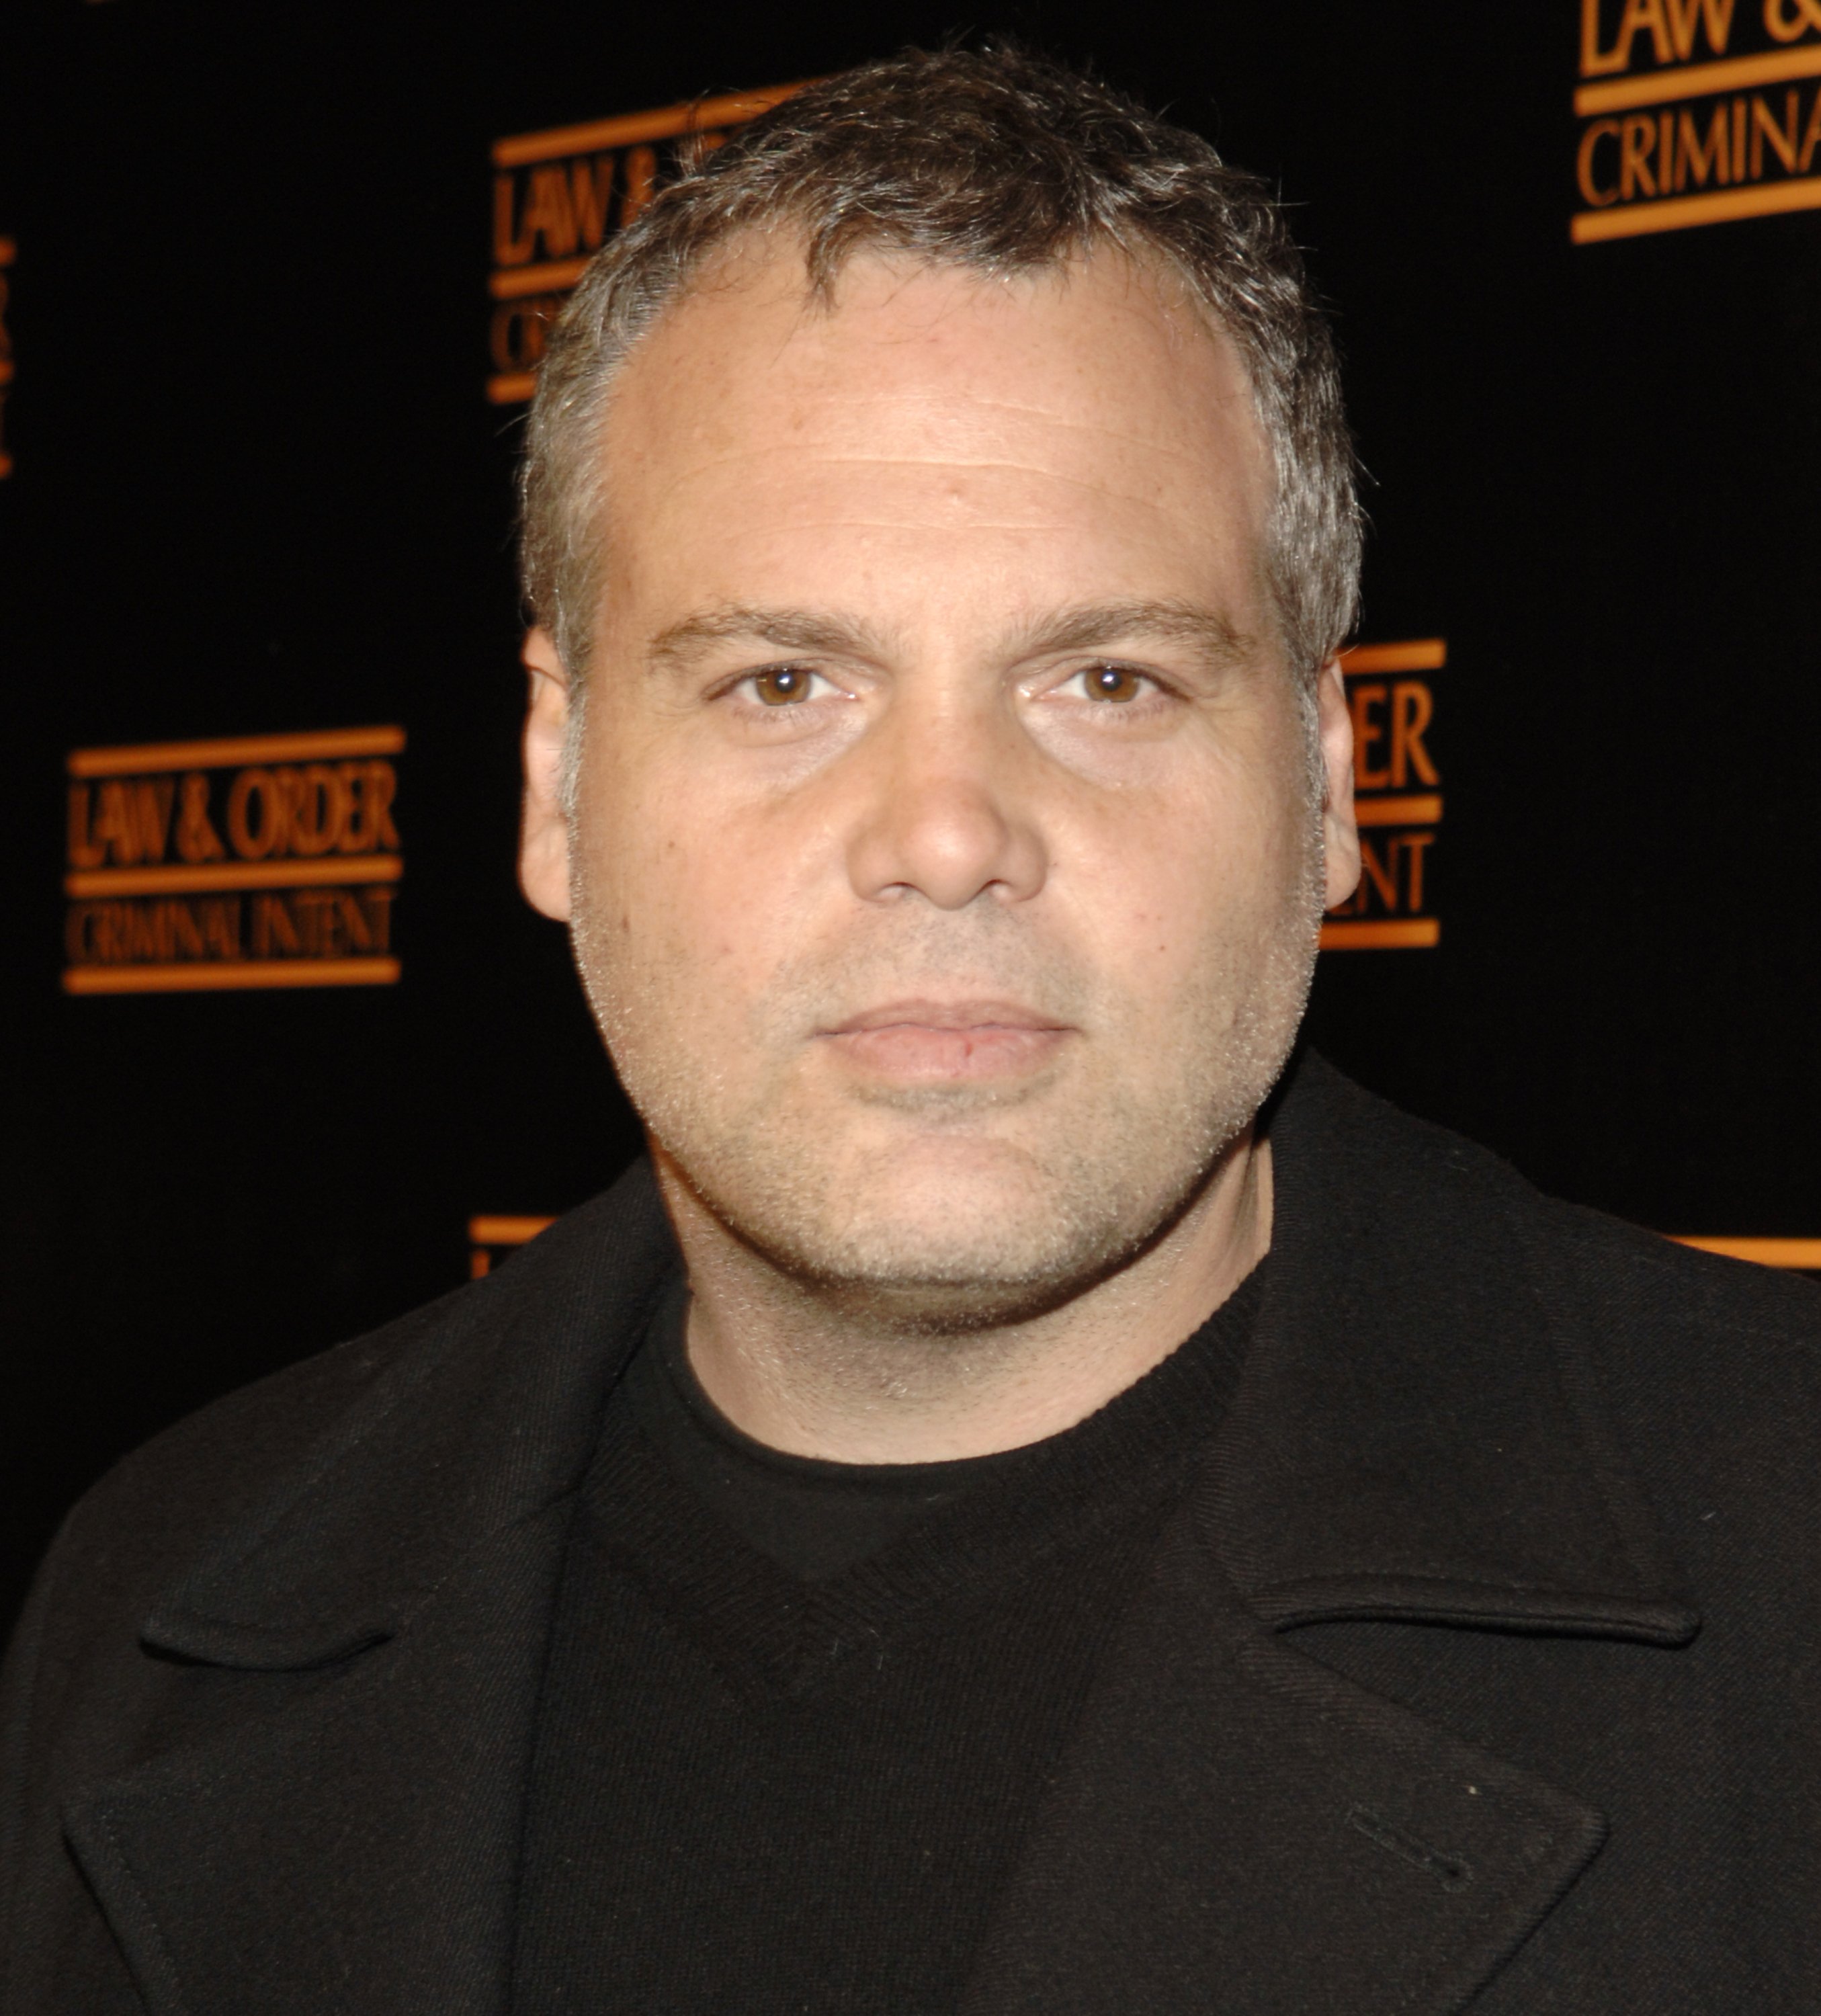 Vincent D'Onofrio during "Law & Order: Criminal Intent" 100th Episode at The Lighthouse at Chelsea Piers in New York City, New York, United States. | Source: Getty Images